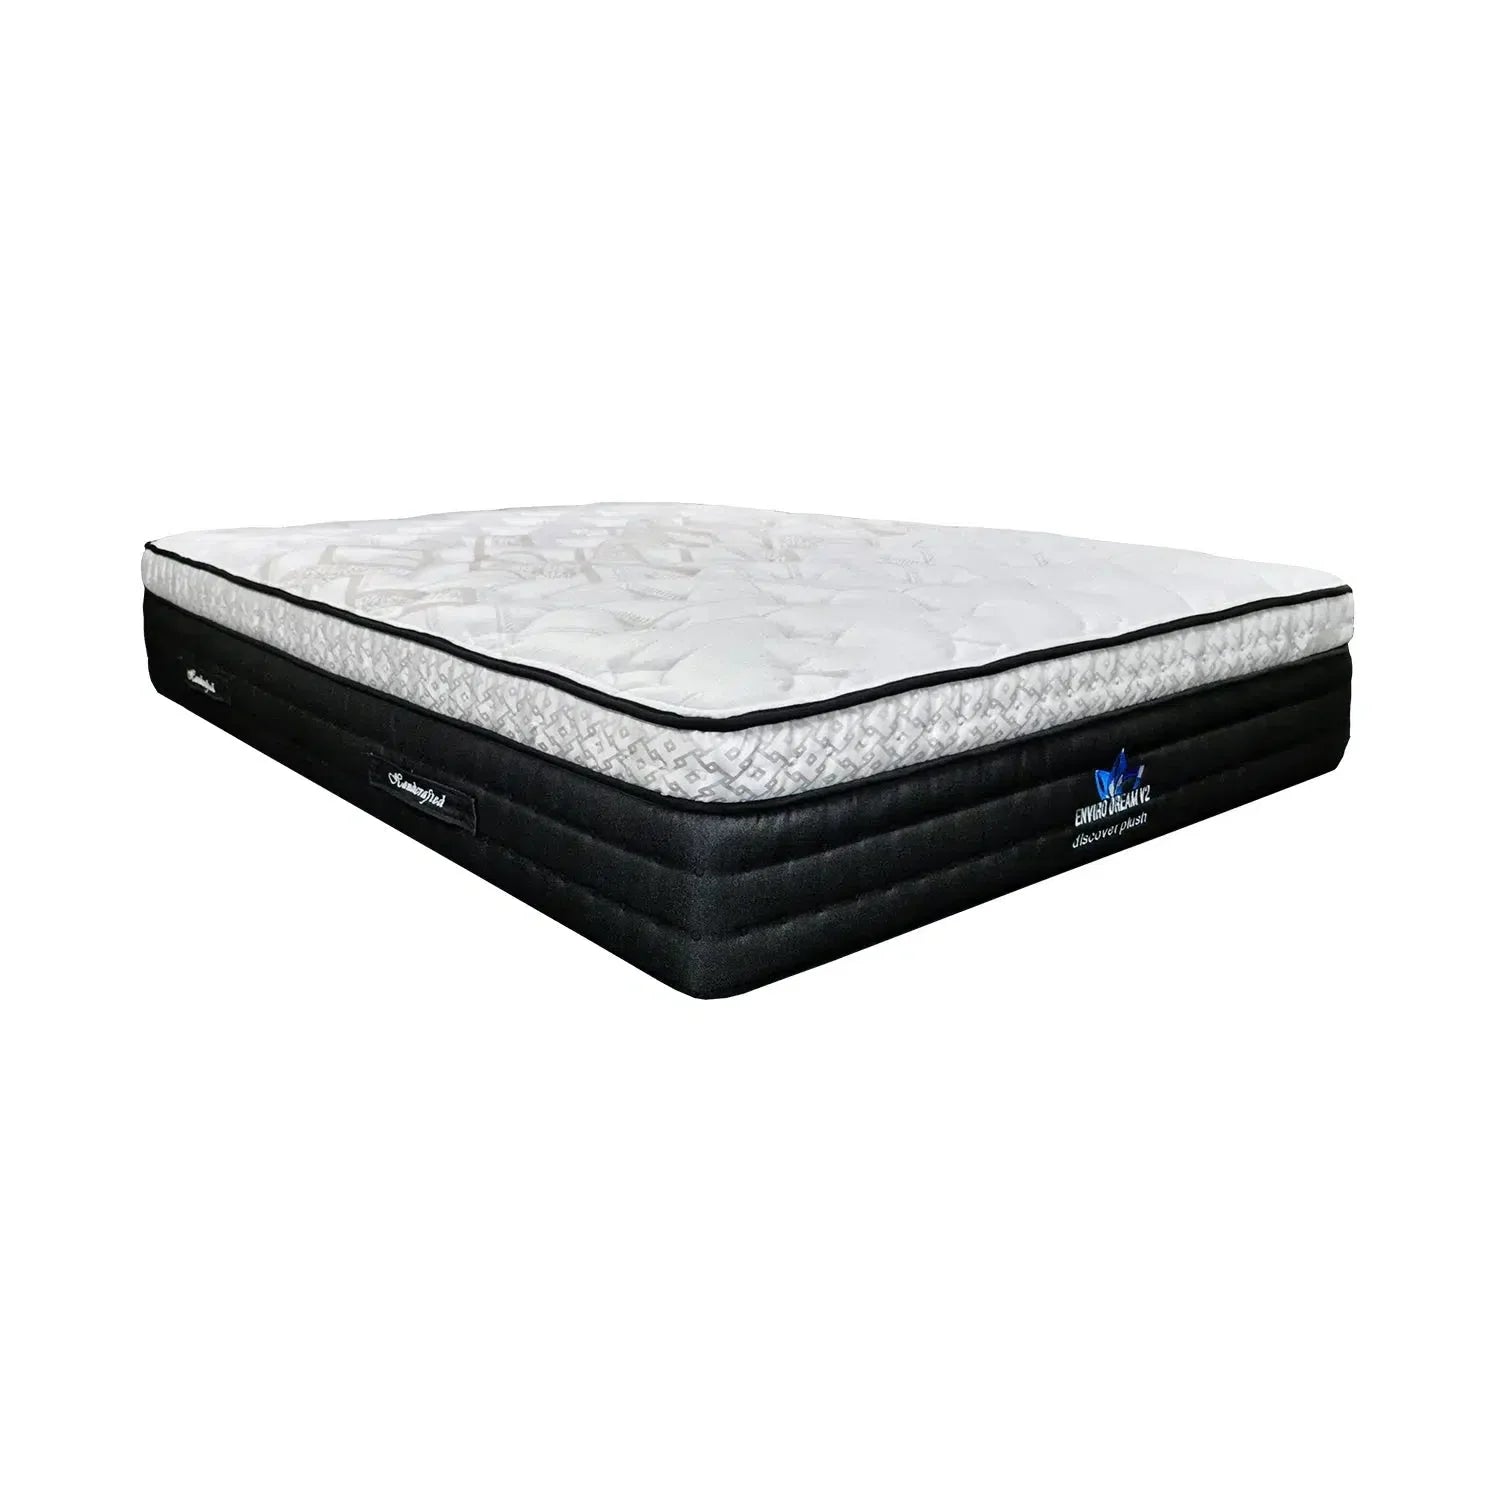 Enviro Dream Hand Crafted Mattress with Damask Fabric by Therapedic-Sleep Doctor